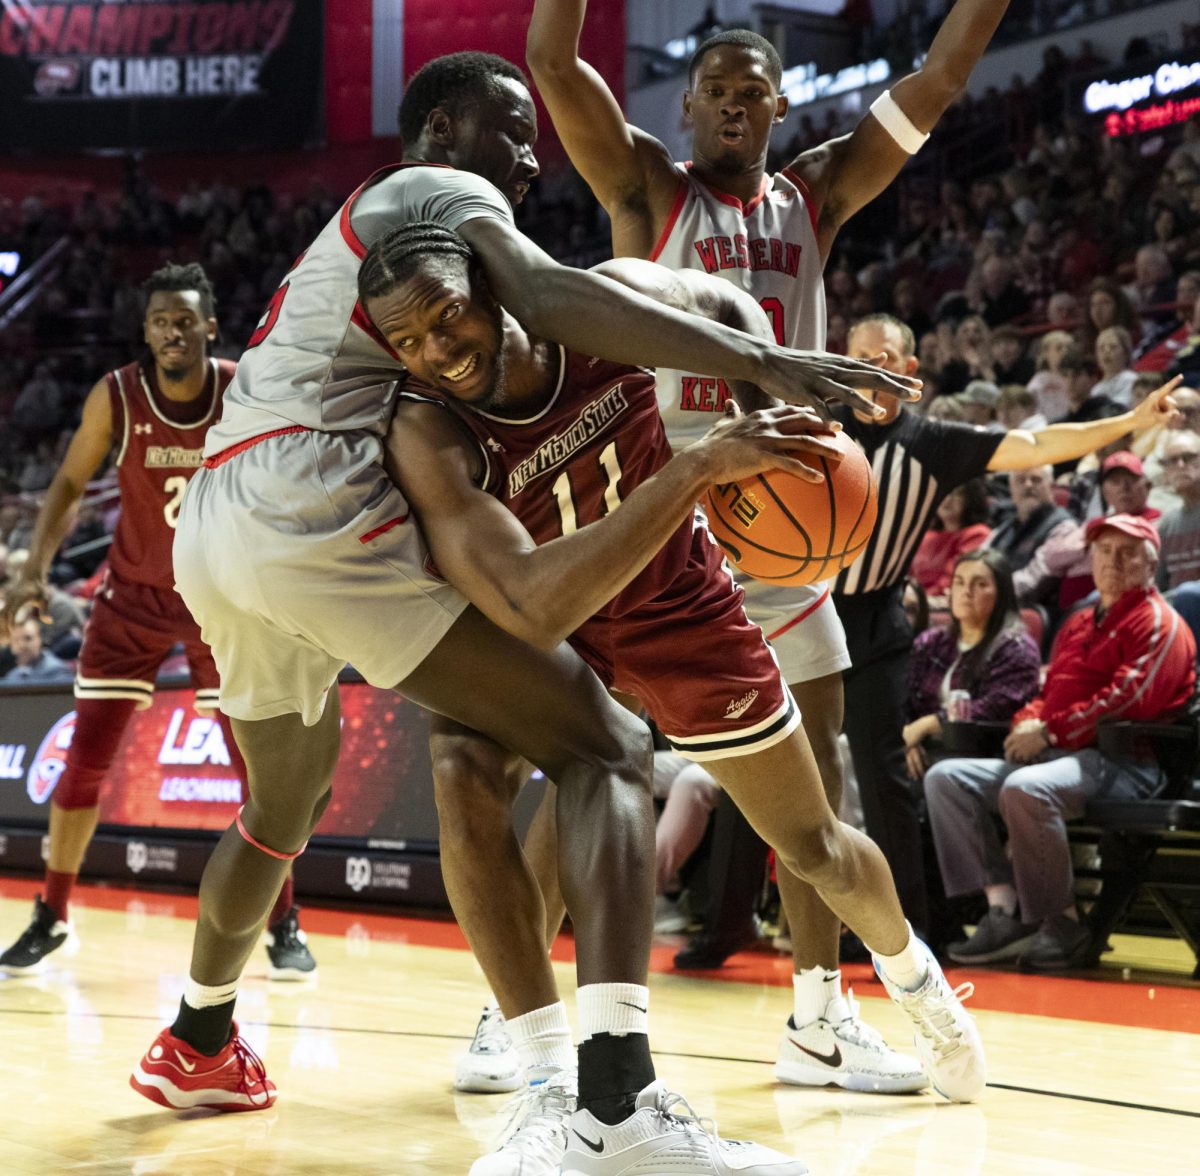 New Mexico State guard Femi Odukale (11) attempts to break past WKU Forward Babacar Faye (5) in WKU’s Senior Night game against NMSU in the Diddle Arena on Feb. 17.